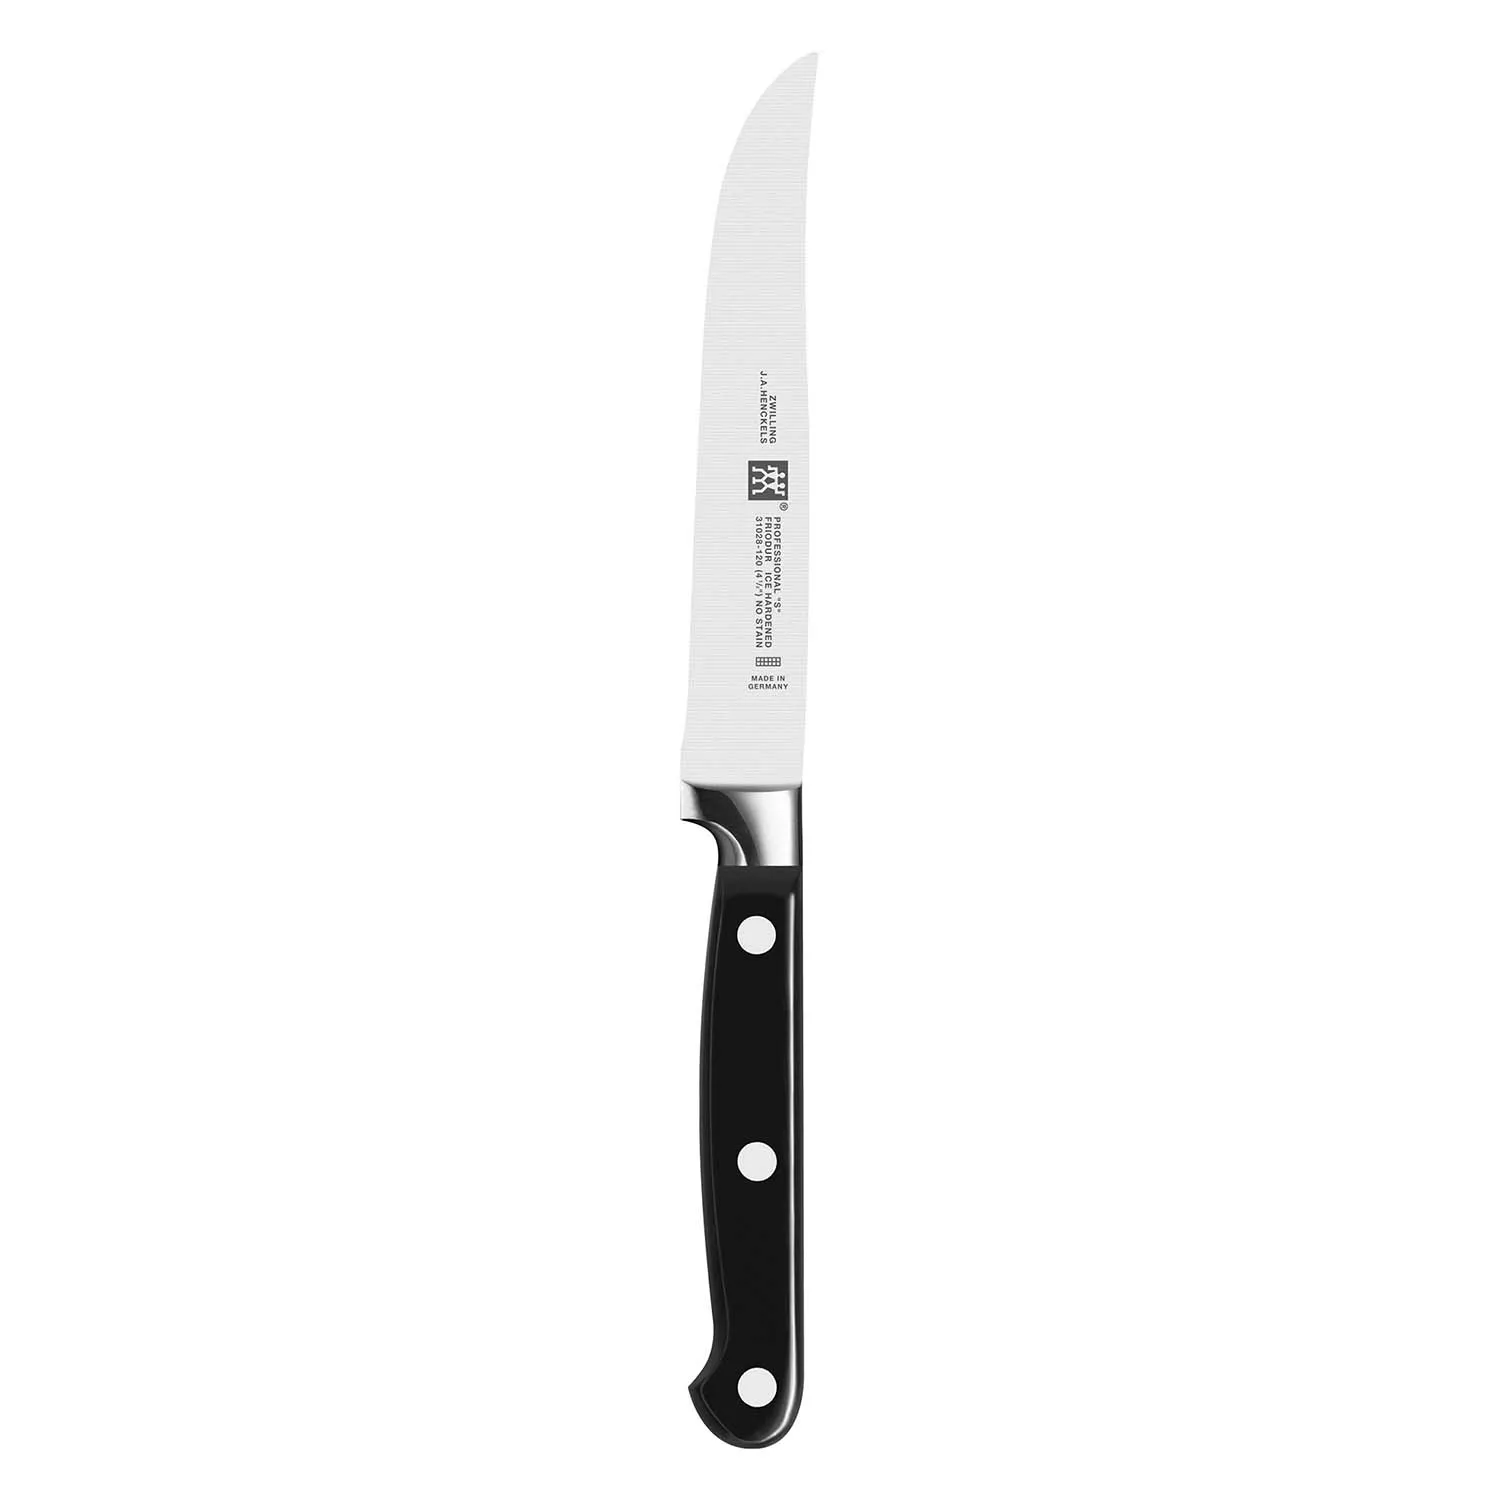 These Razor-Sharp Zwilling Knives Cut Steak 'Like Butter,' and